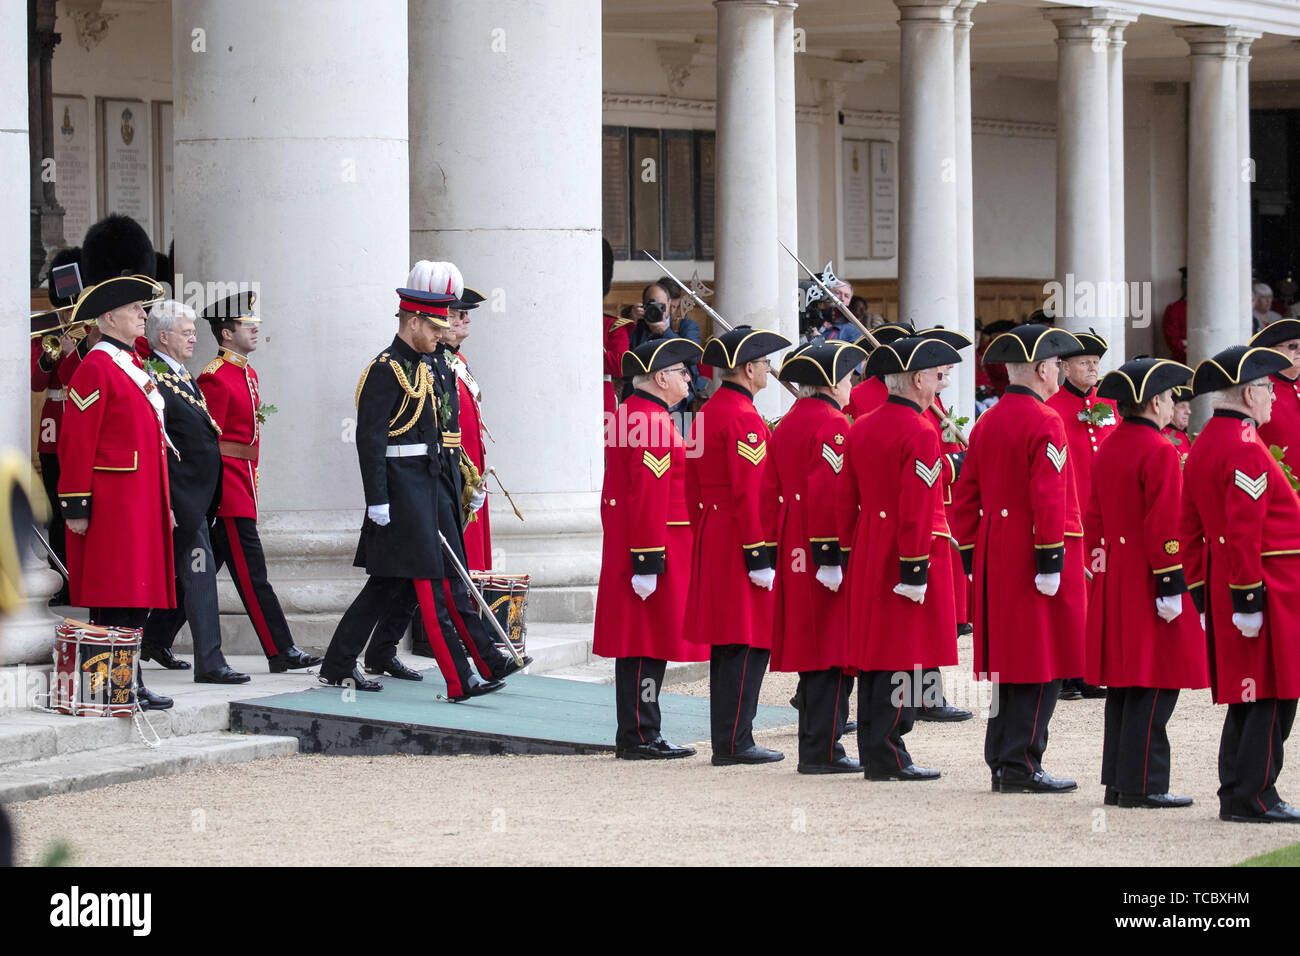 London, UK. 06th June, 2019. Prince Harry, Duke of Sussex attends, as reviewing officer, the annual Founder's Day Parade at the Royal Hospital Chelsea in London, England. JUNE 6th 2019. Credit: Matrix/MediaPunch ***FOR USA ONLY*** REF: JRD 192074 Credit: MediaPunch Inc/Alamy Live News Stock Photo